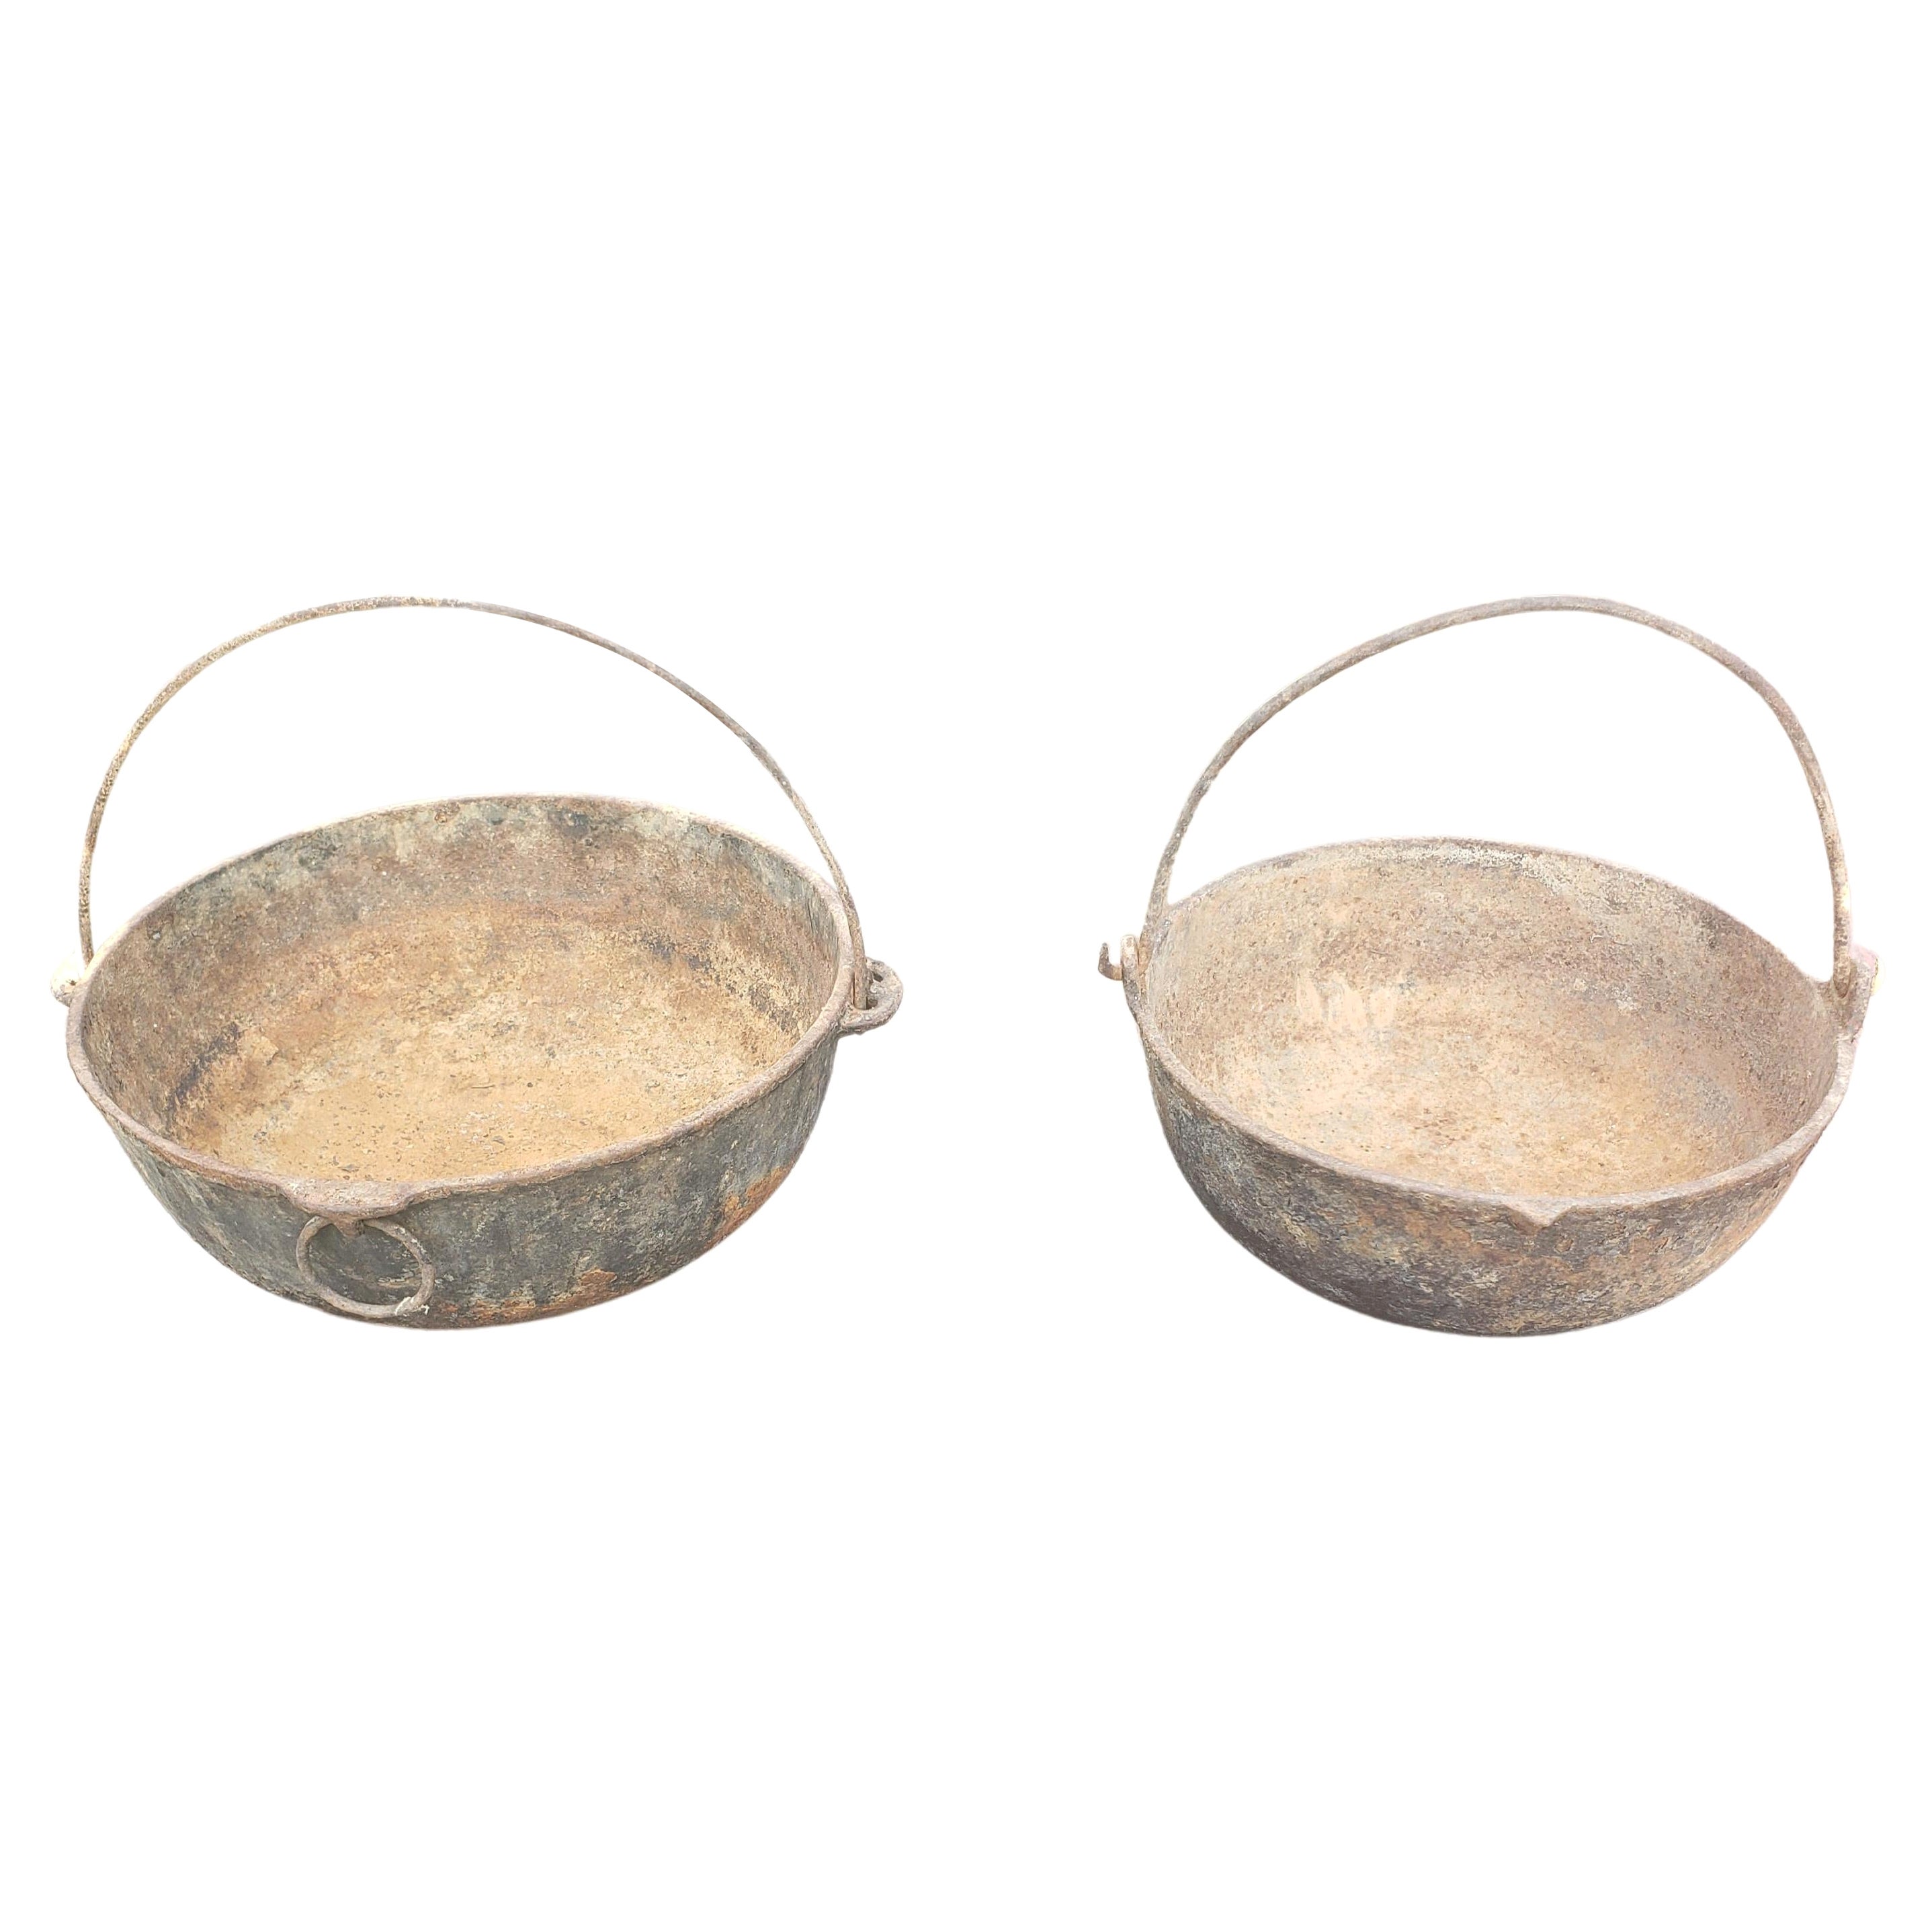 Vintage Hanging Kettles with Wonderful Rustic Patina circa 1900s, a Pair